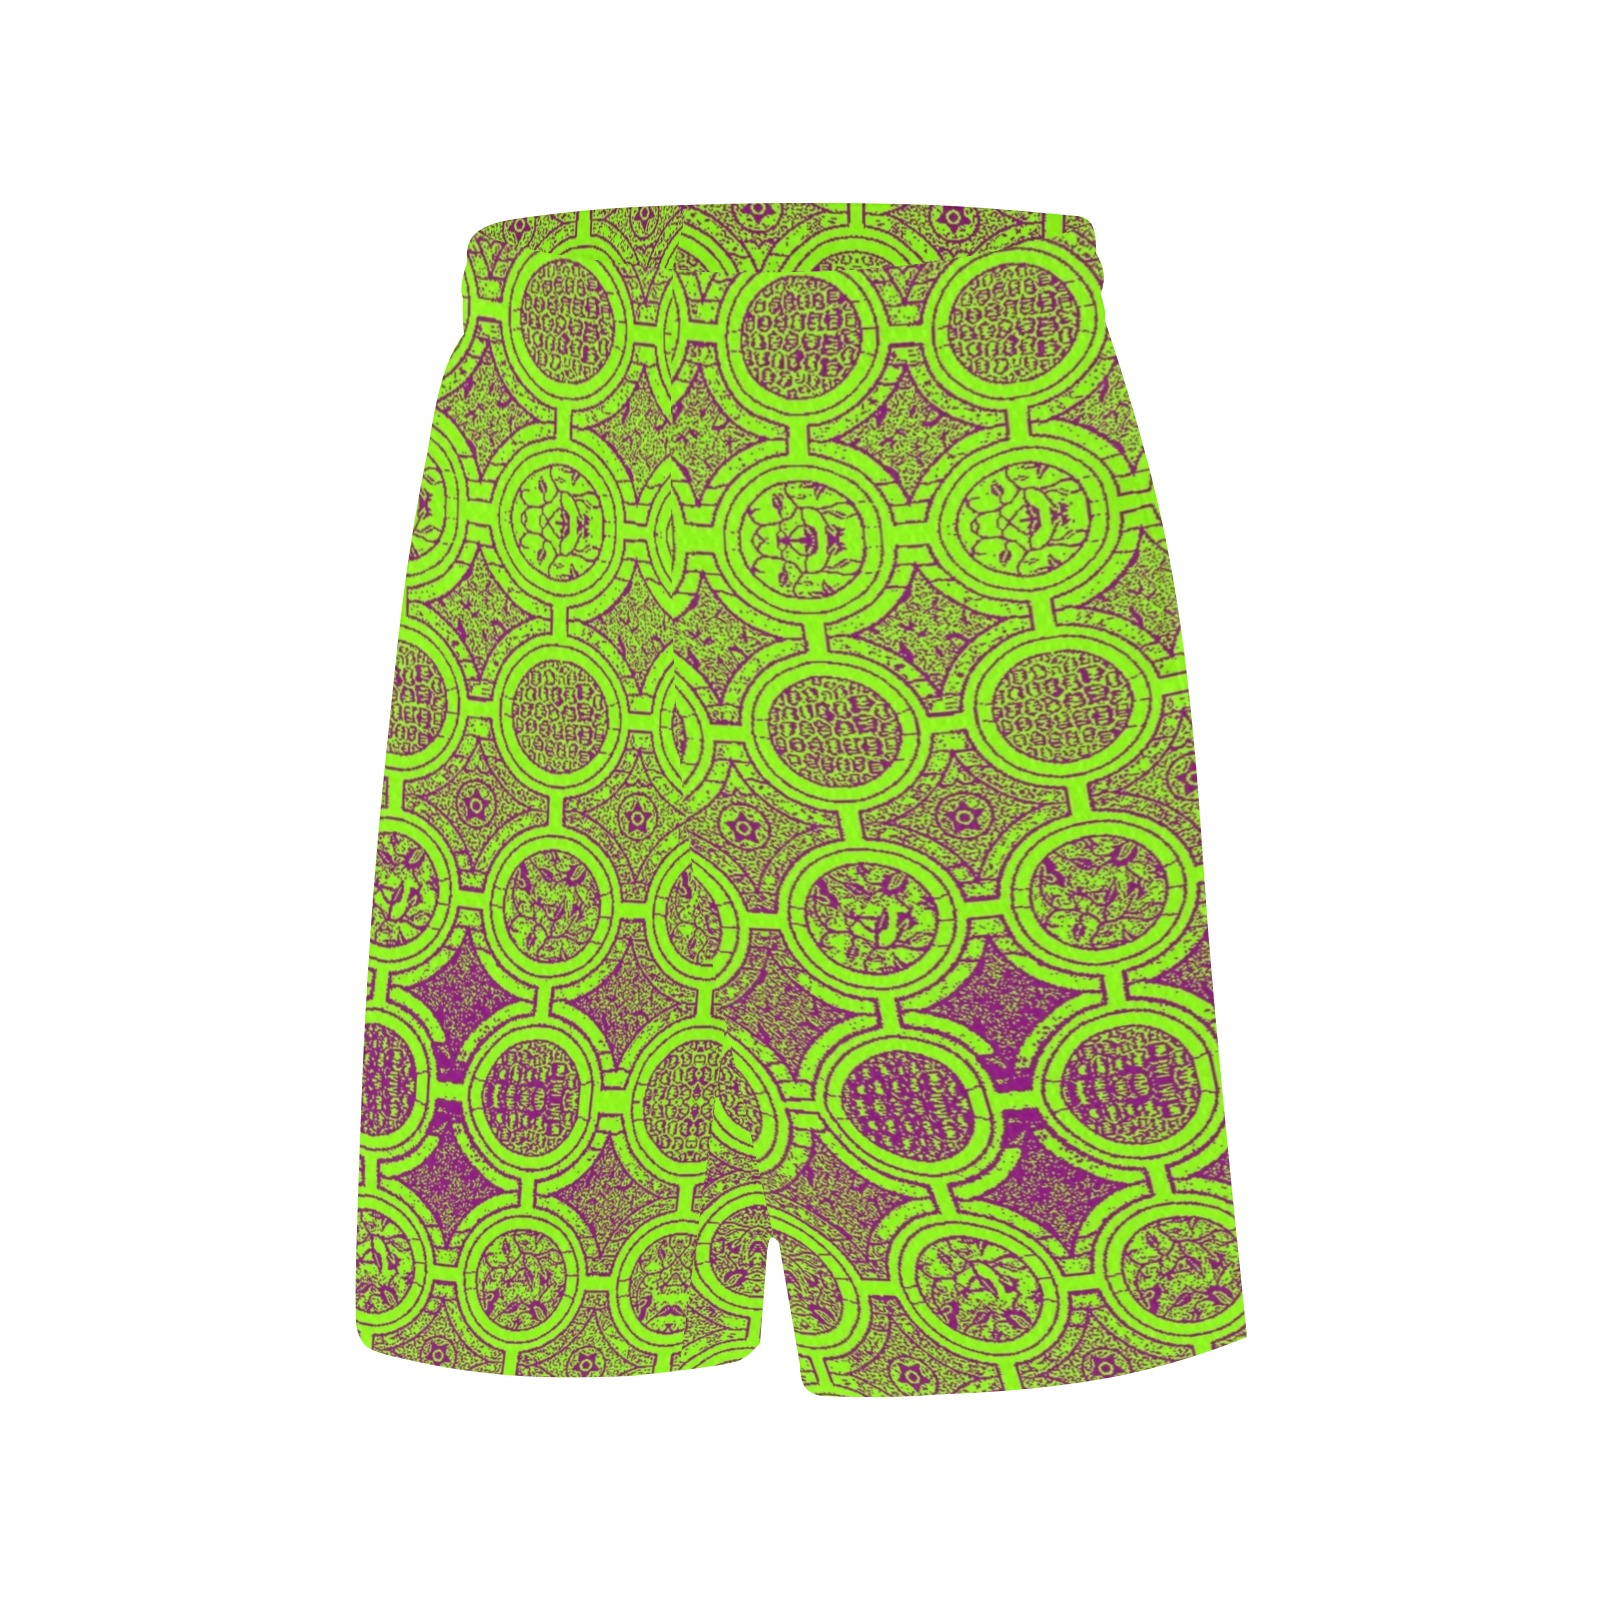 AFRICAN PRINT PATTERN 2 All Over Print Basketball Shorts with Pocket